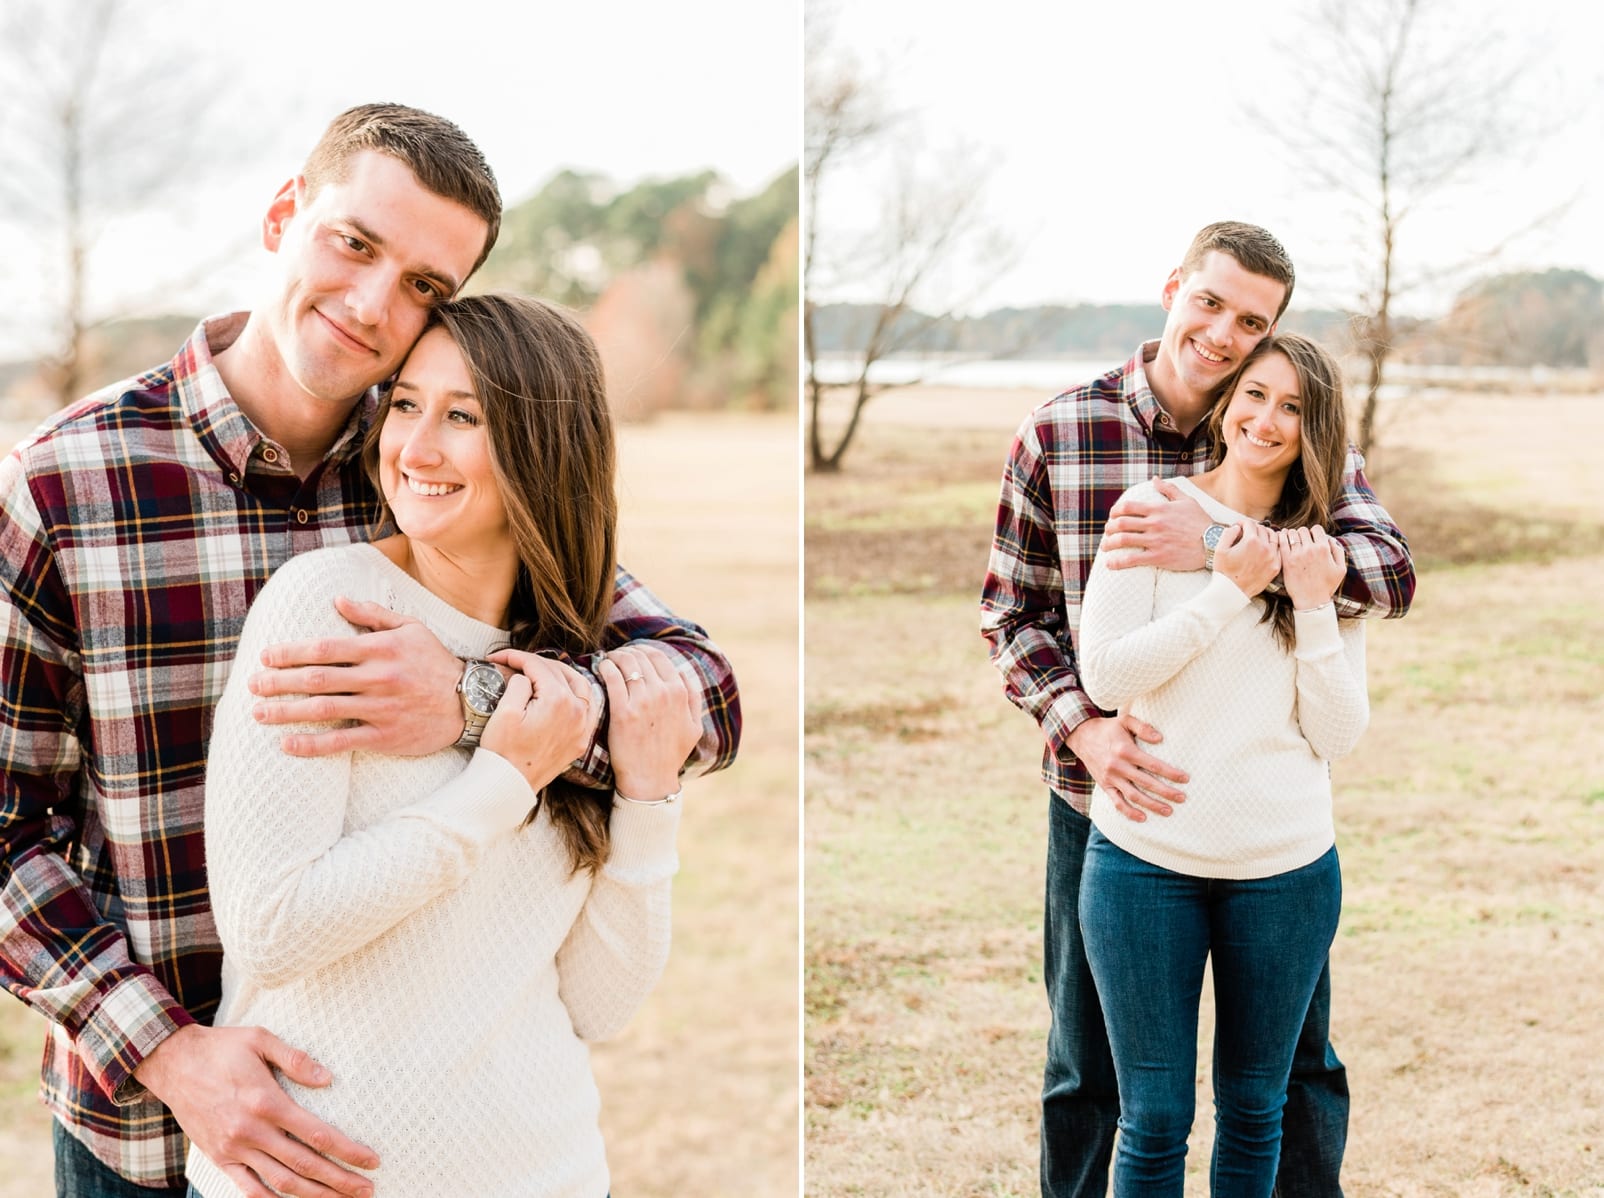 Cary couple snuggled together in a white sweater and plaid shirt during engagement pictures photo